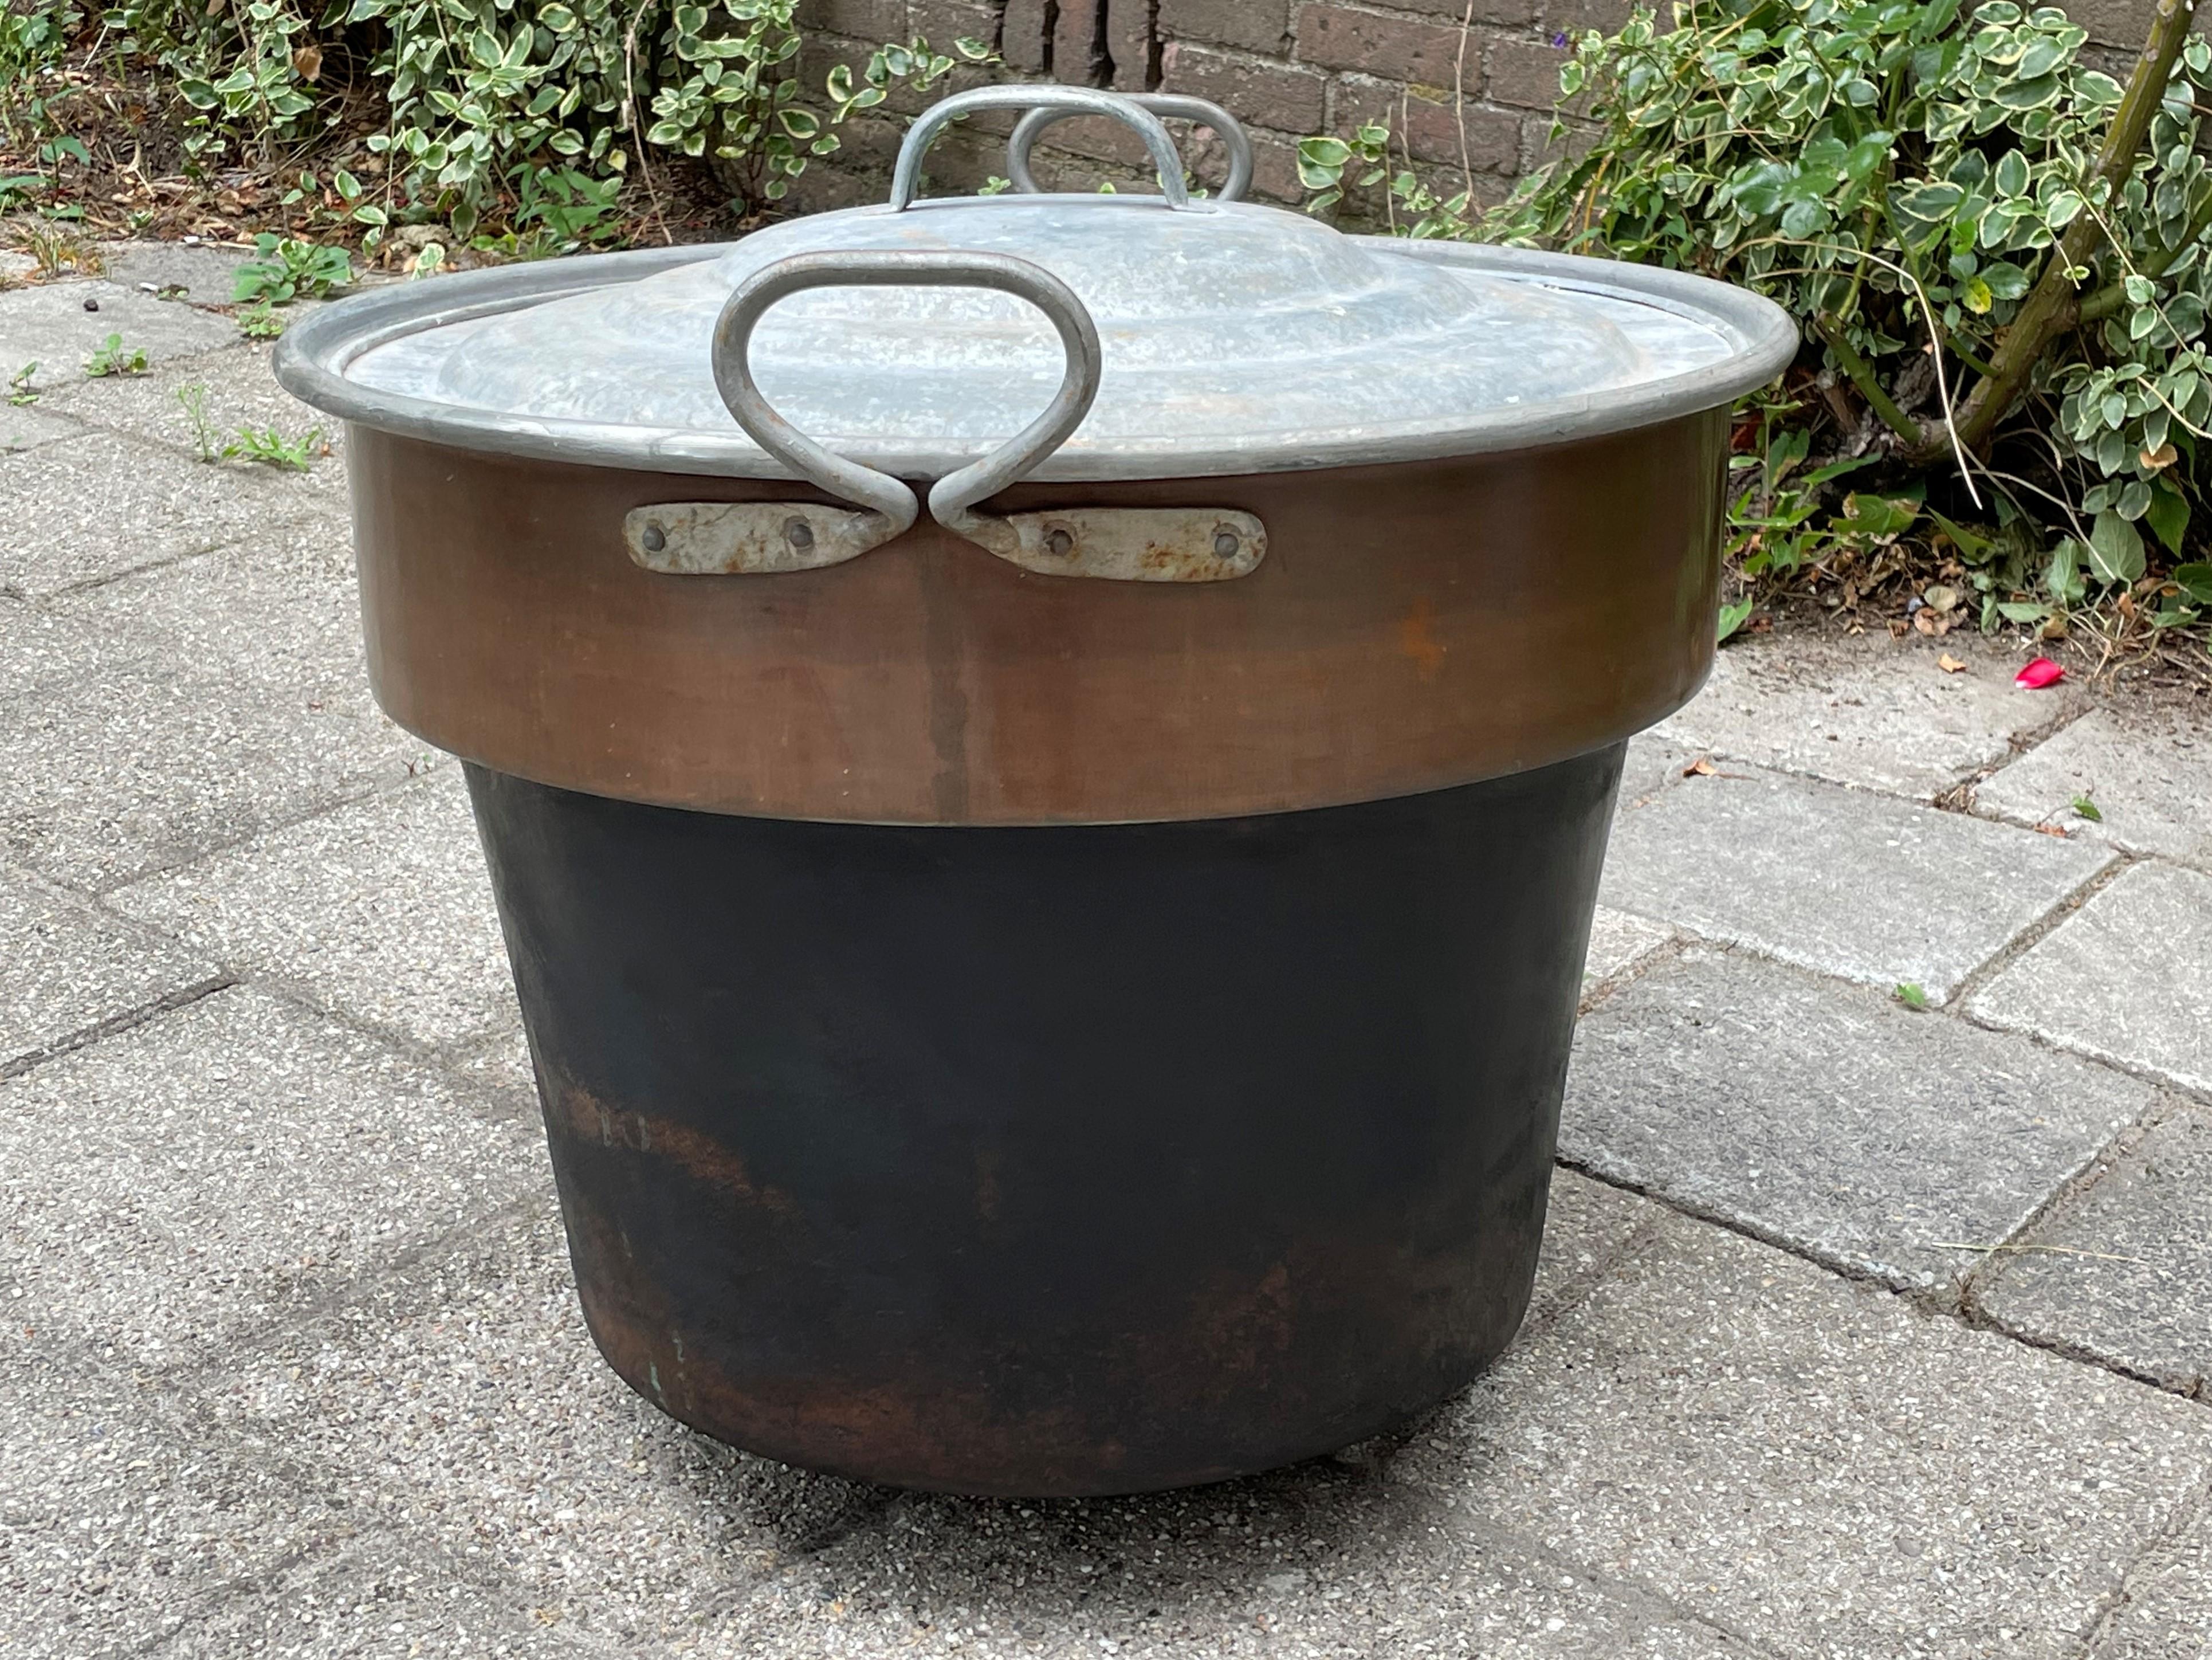 Marvelous size and timeless shape, partially galvanized copper bucket for inside and outside usage.

Only the wealthiest of people in the late 1800s would have been able to afford a hand-crafted copper bucket of this size and quality. This extra